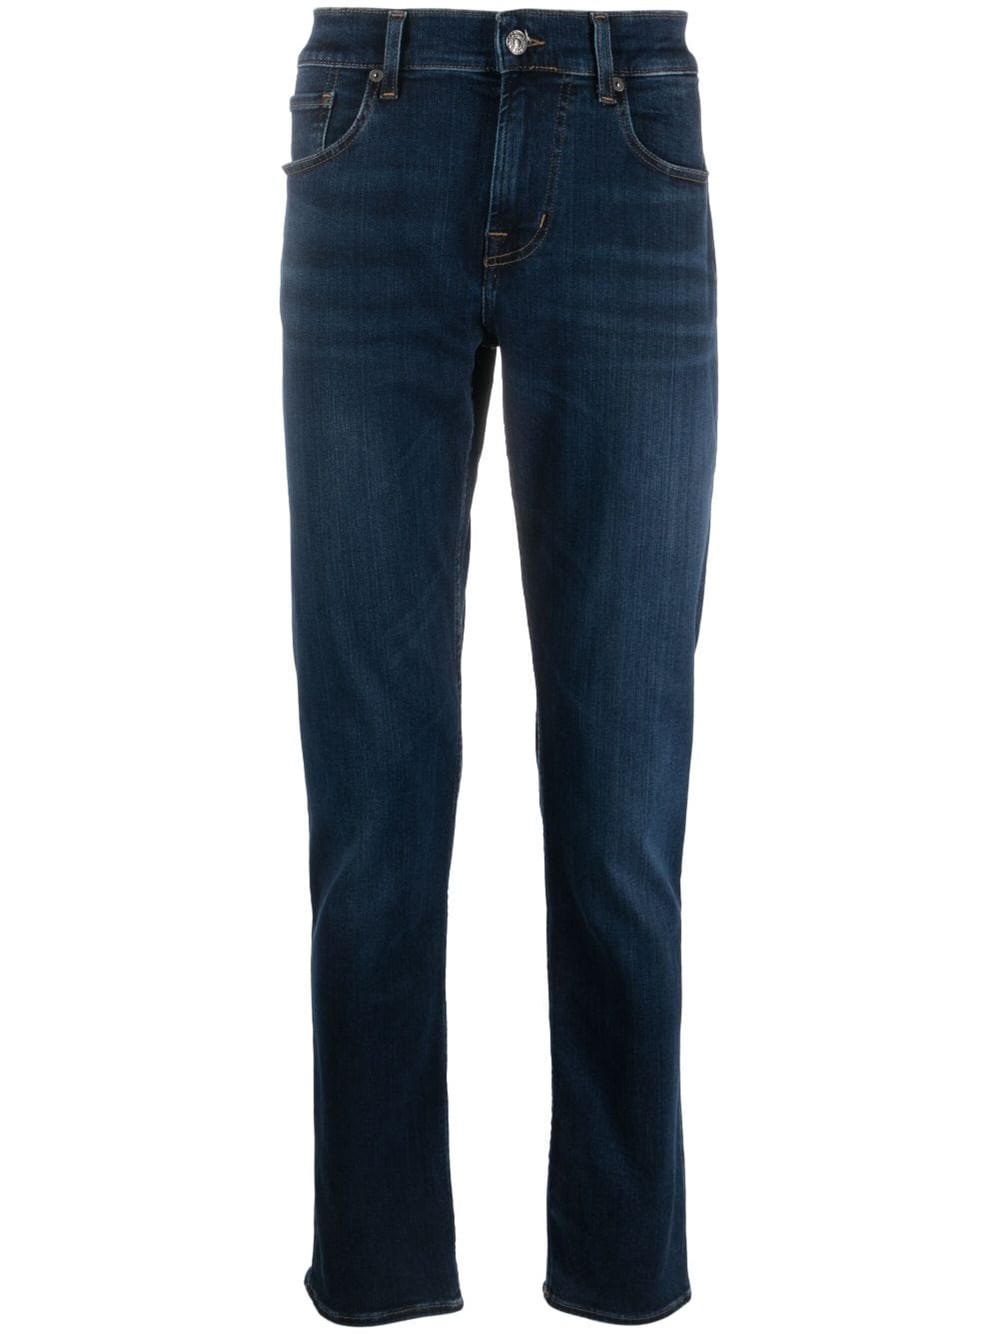 7 FOR ALL MANKIND `SLIMMY TAPERED STRETCH TEK ENIGMA` JEANS